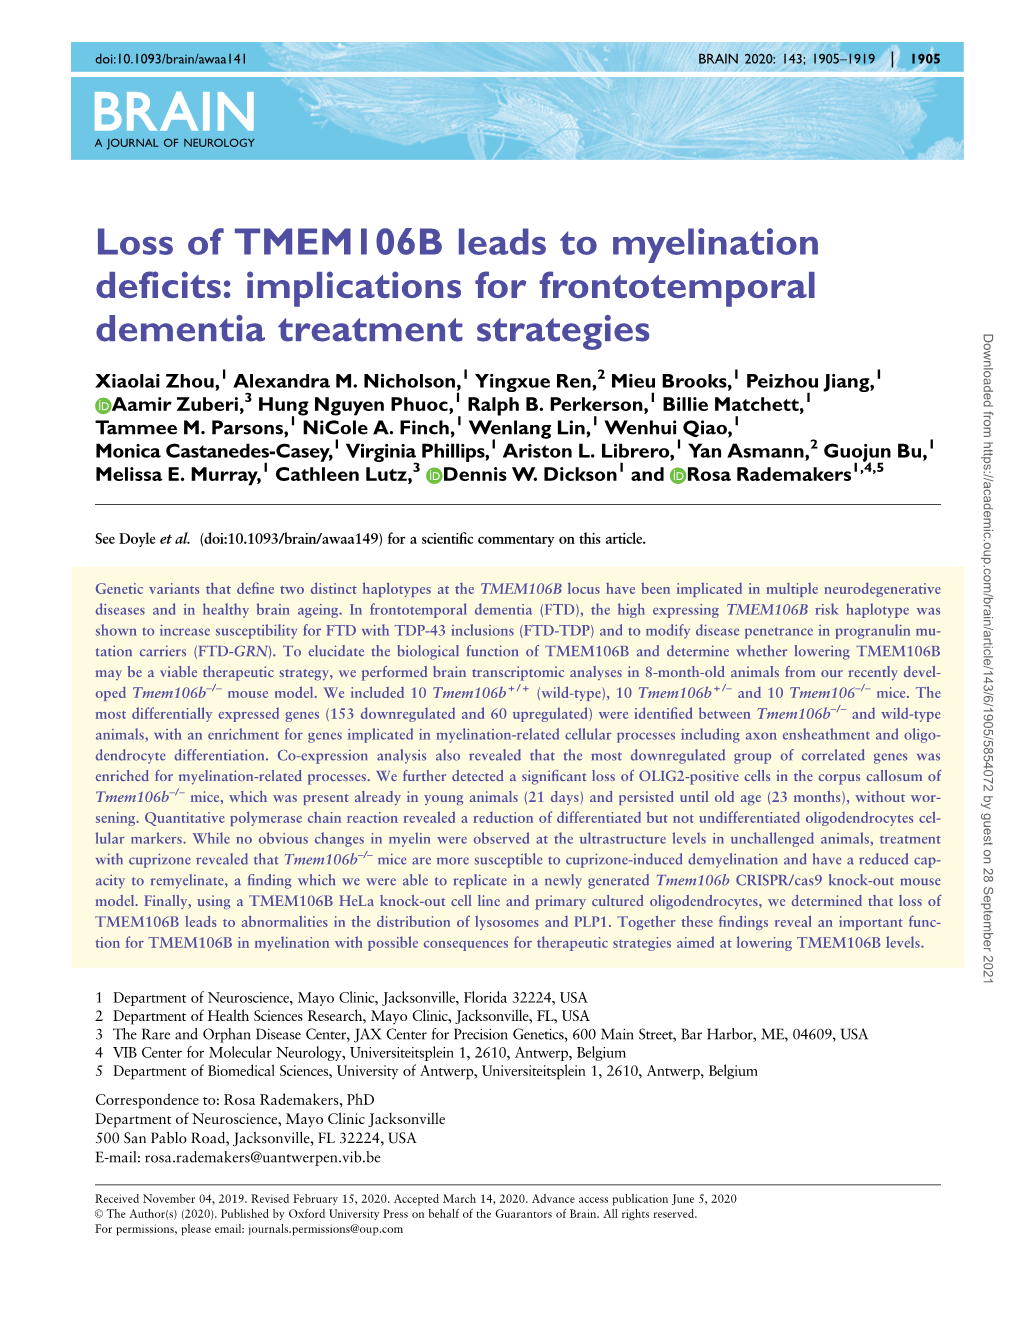 Loss of TMEM106B Leads to Myelination Deficits: Implications for Frontotemporal Dementia Treatment Strategies